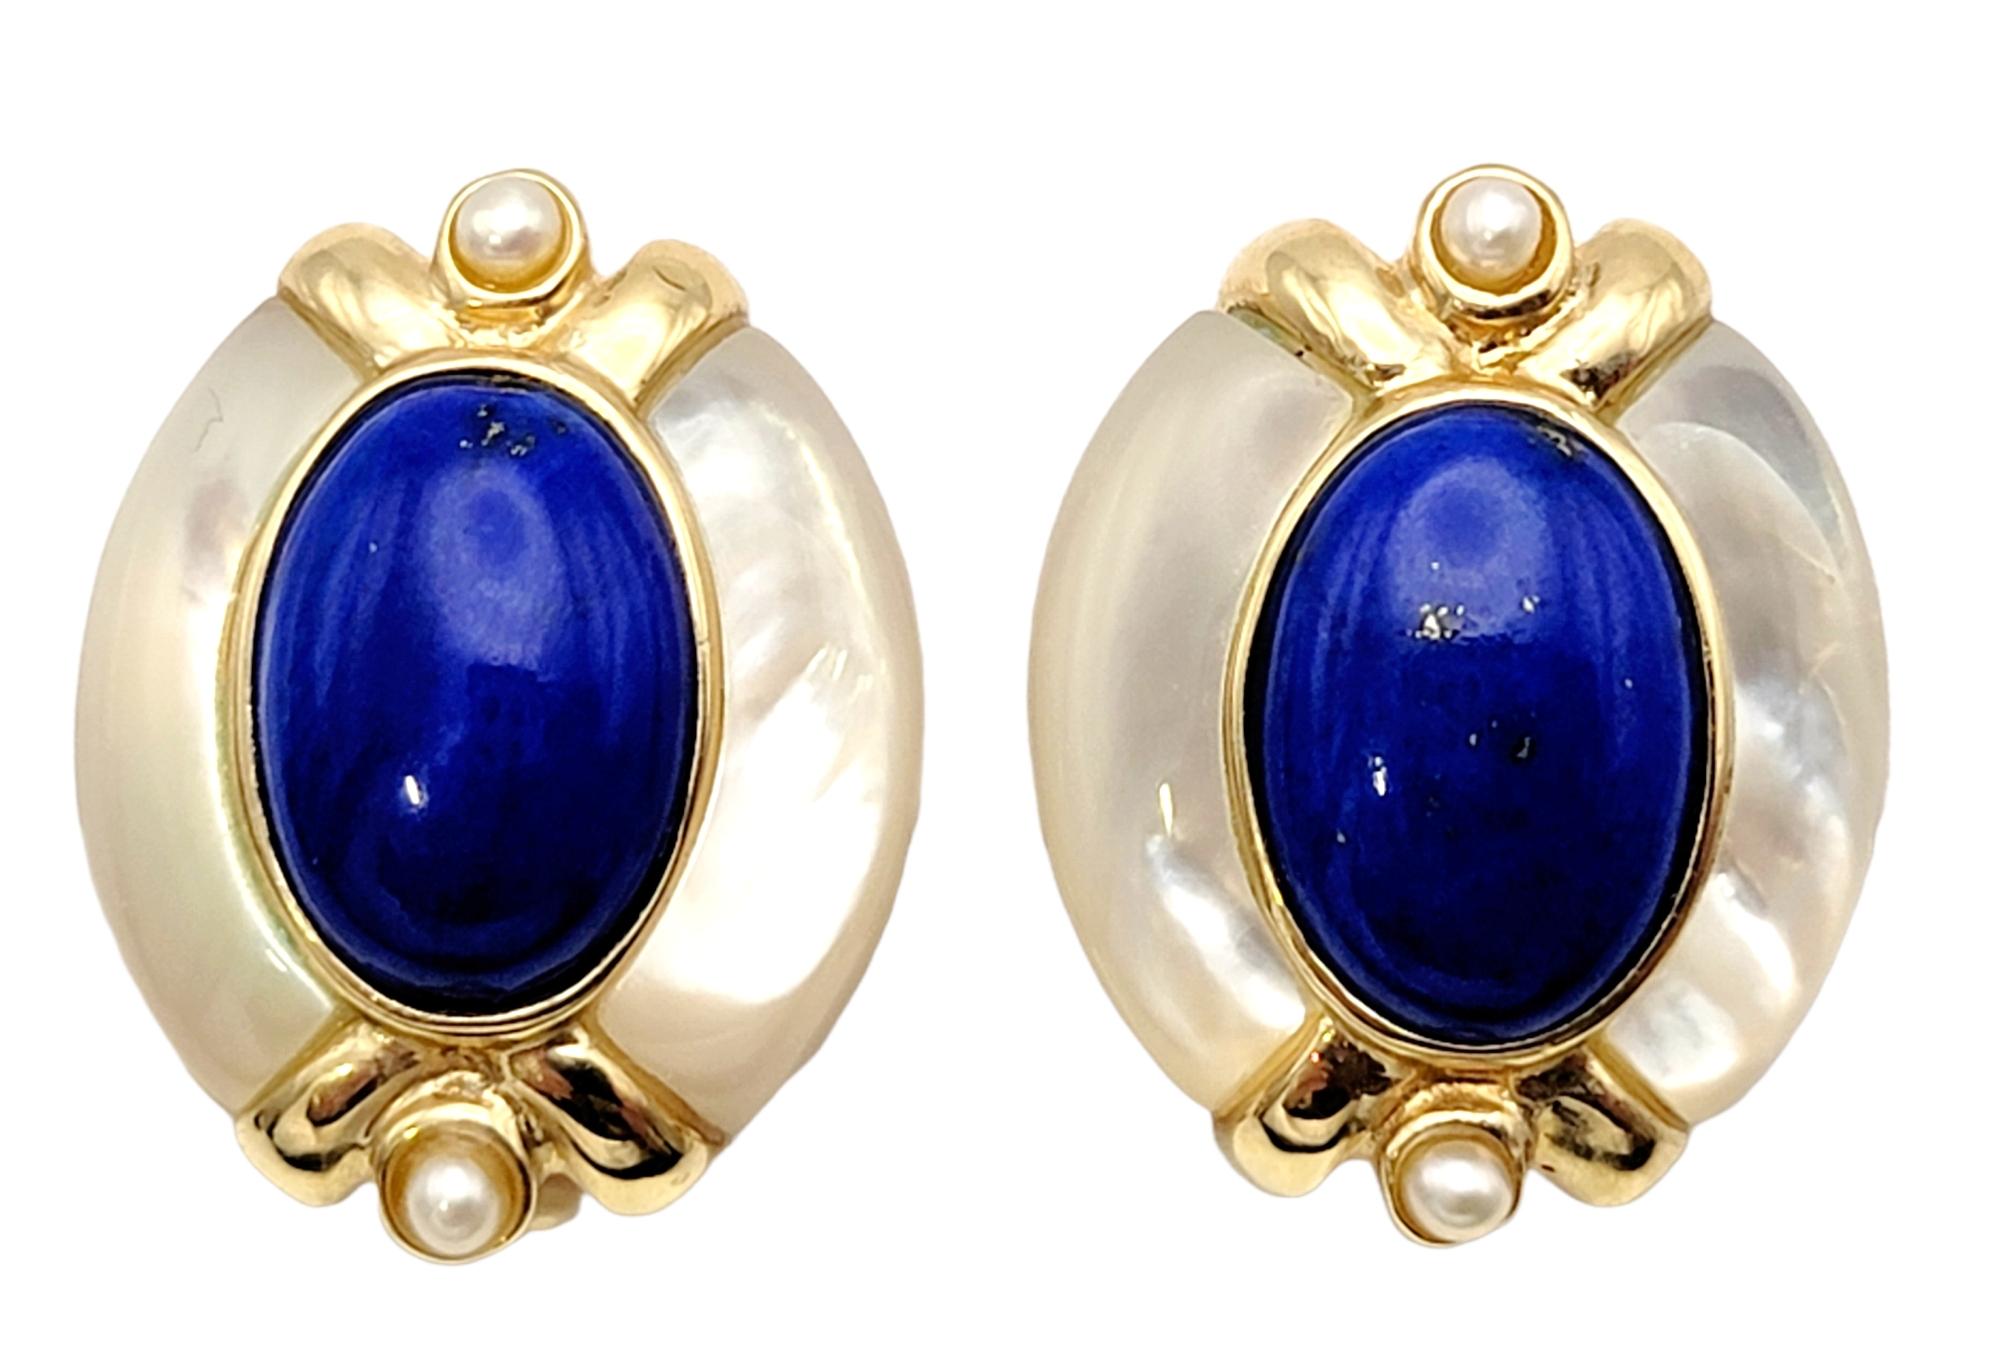 Bright and beautiful lapis and pearl pierced earrings fill the lobe with colorful elegance. The iridescent pearls absolutely radiate around the bright blue lapis, while the warm yellow gold offers a stunning contrast.  

Metal: 14K Yellow